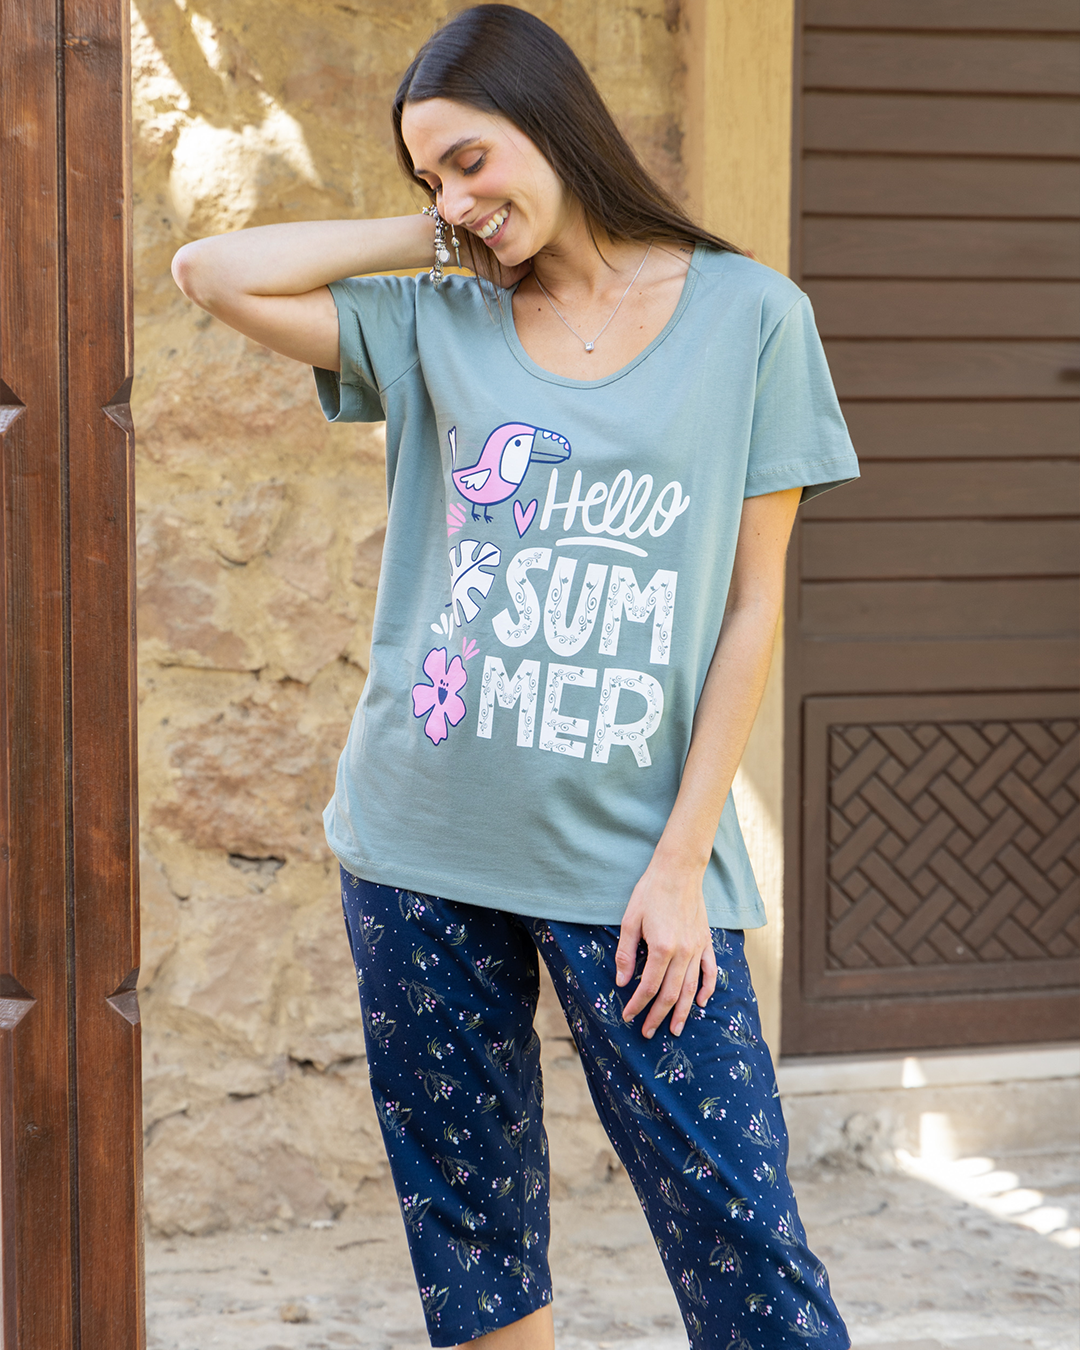 Women's pajamas, half a sleeve, a rotation of the branches